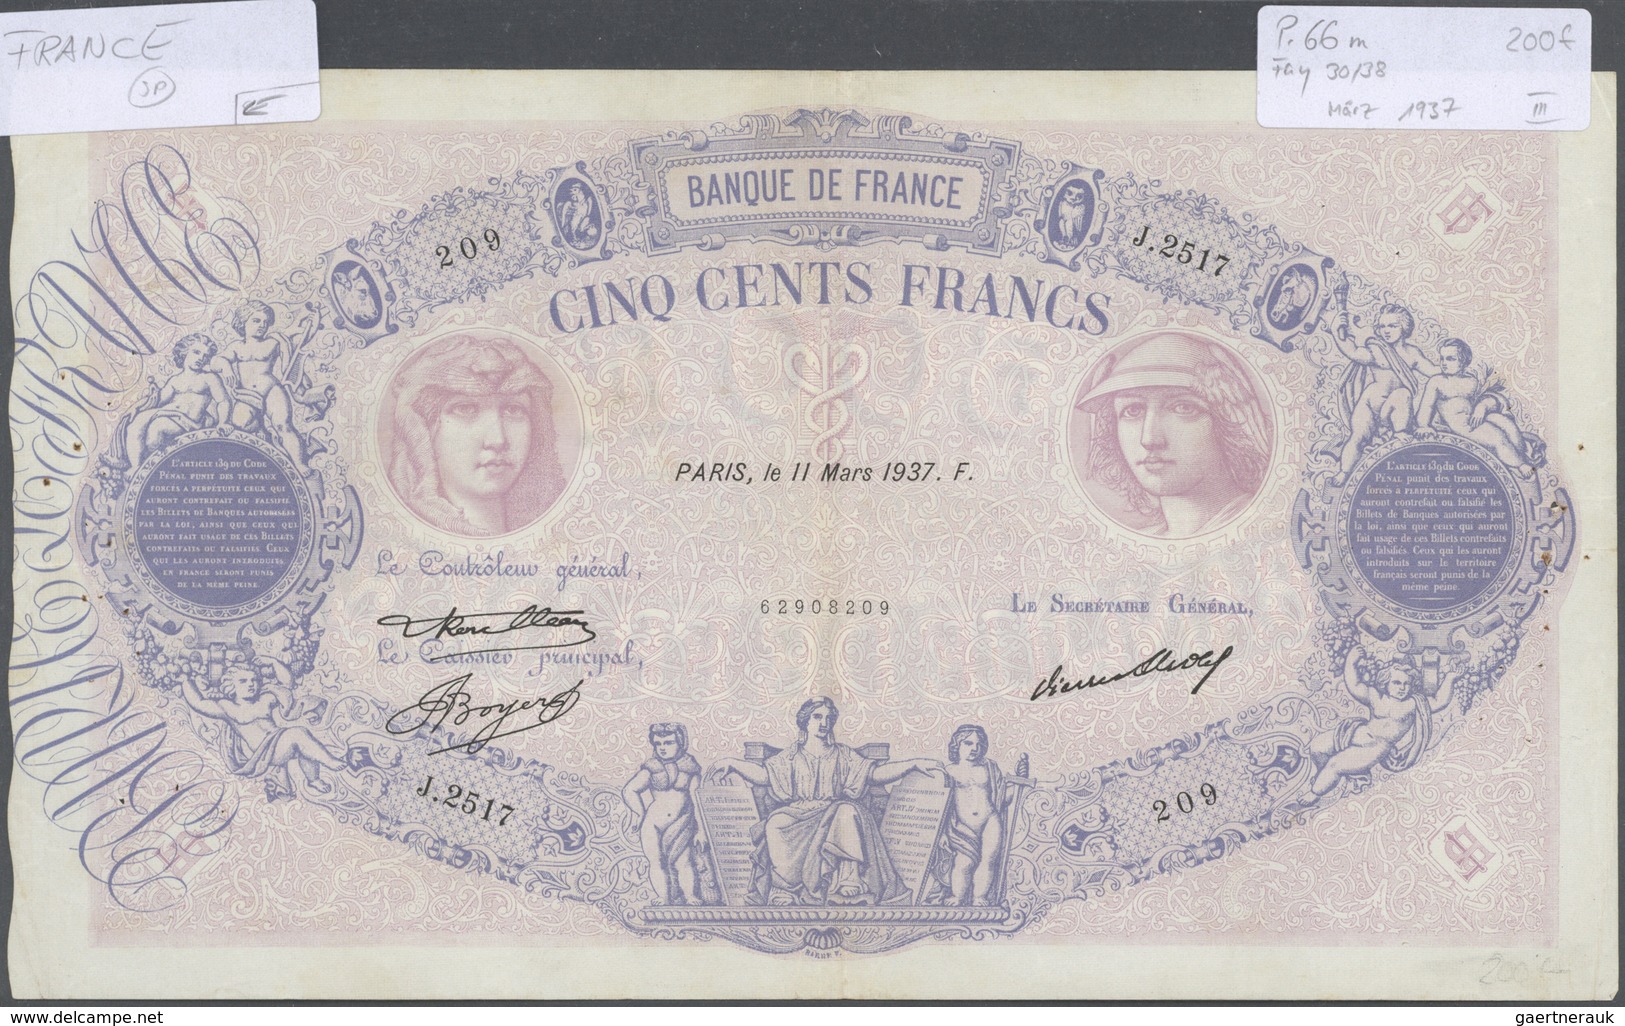 01472 France / Frankreich: set of 12 large size banknotes containing 500 Francs 1920 P. 66h (F), 500 Franc